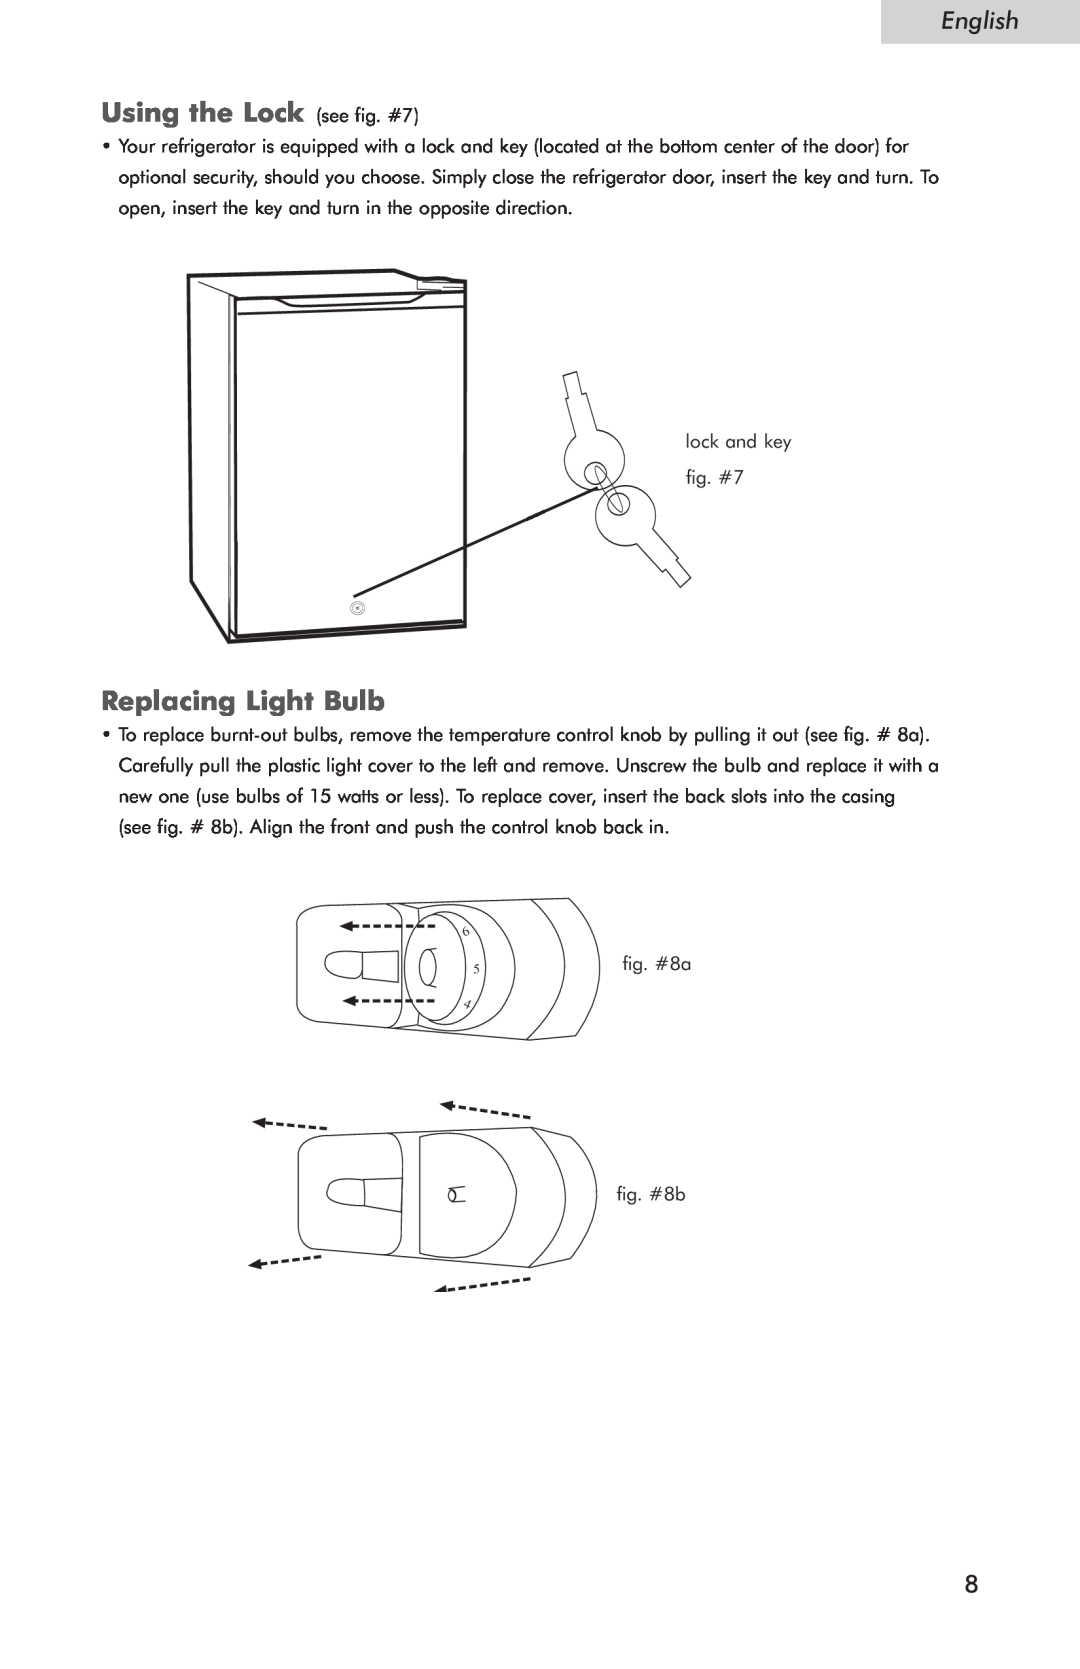 Haier HSP05WNC user manual Using the Lock see fig. #7, Replacing Light Bulb, English 